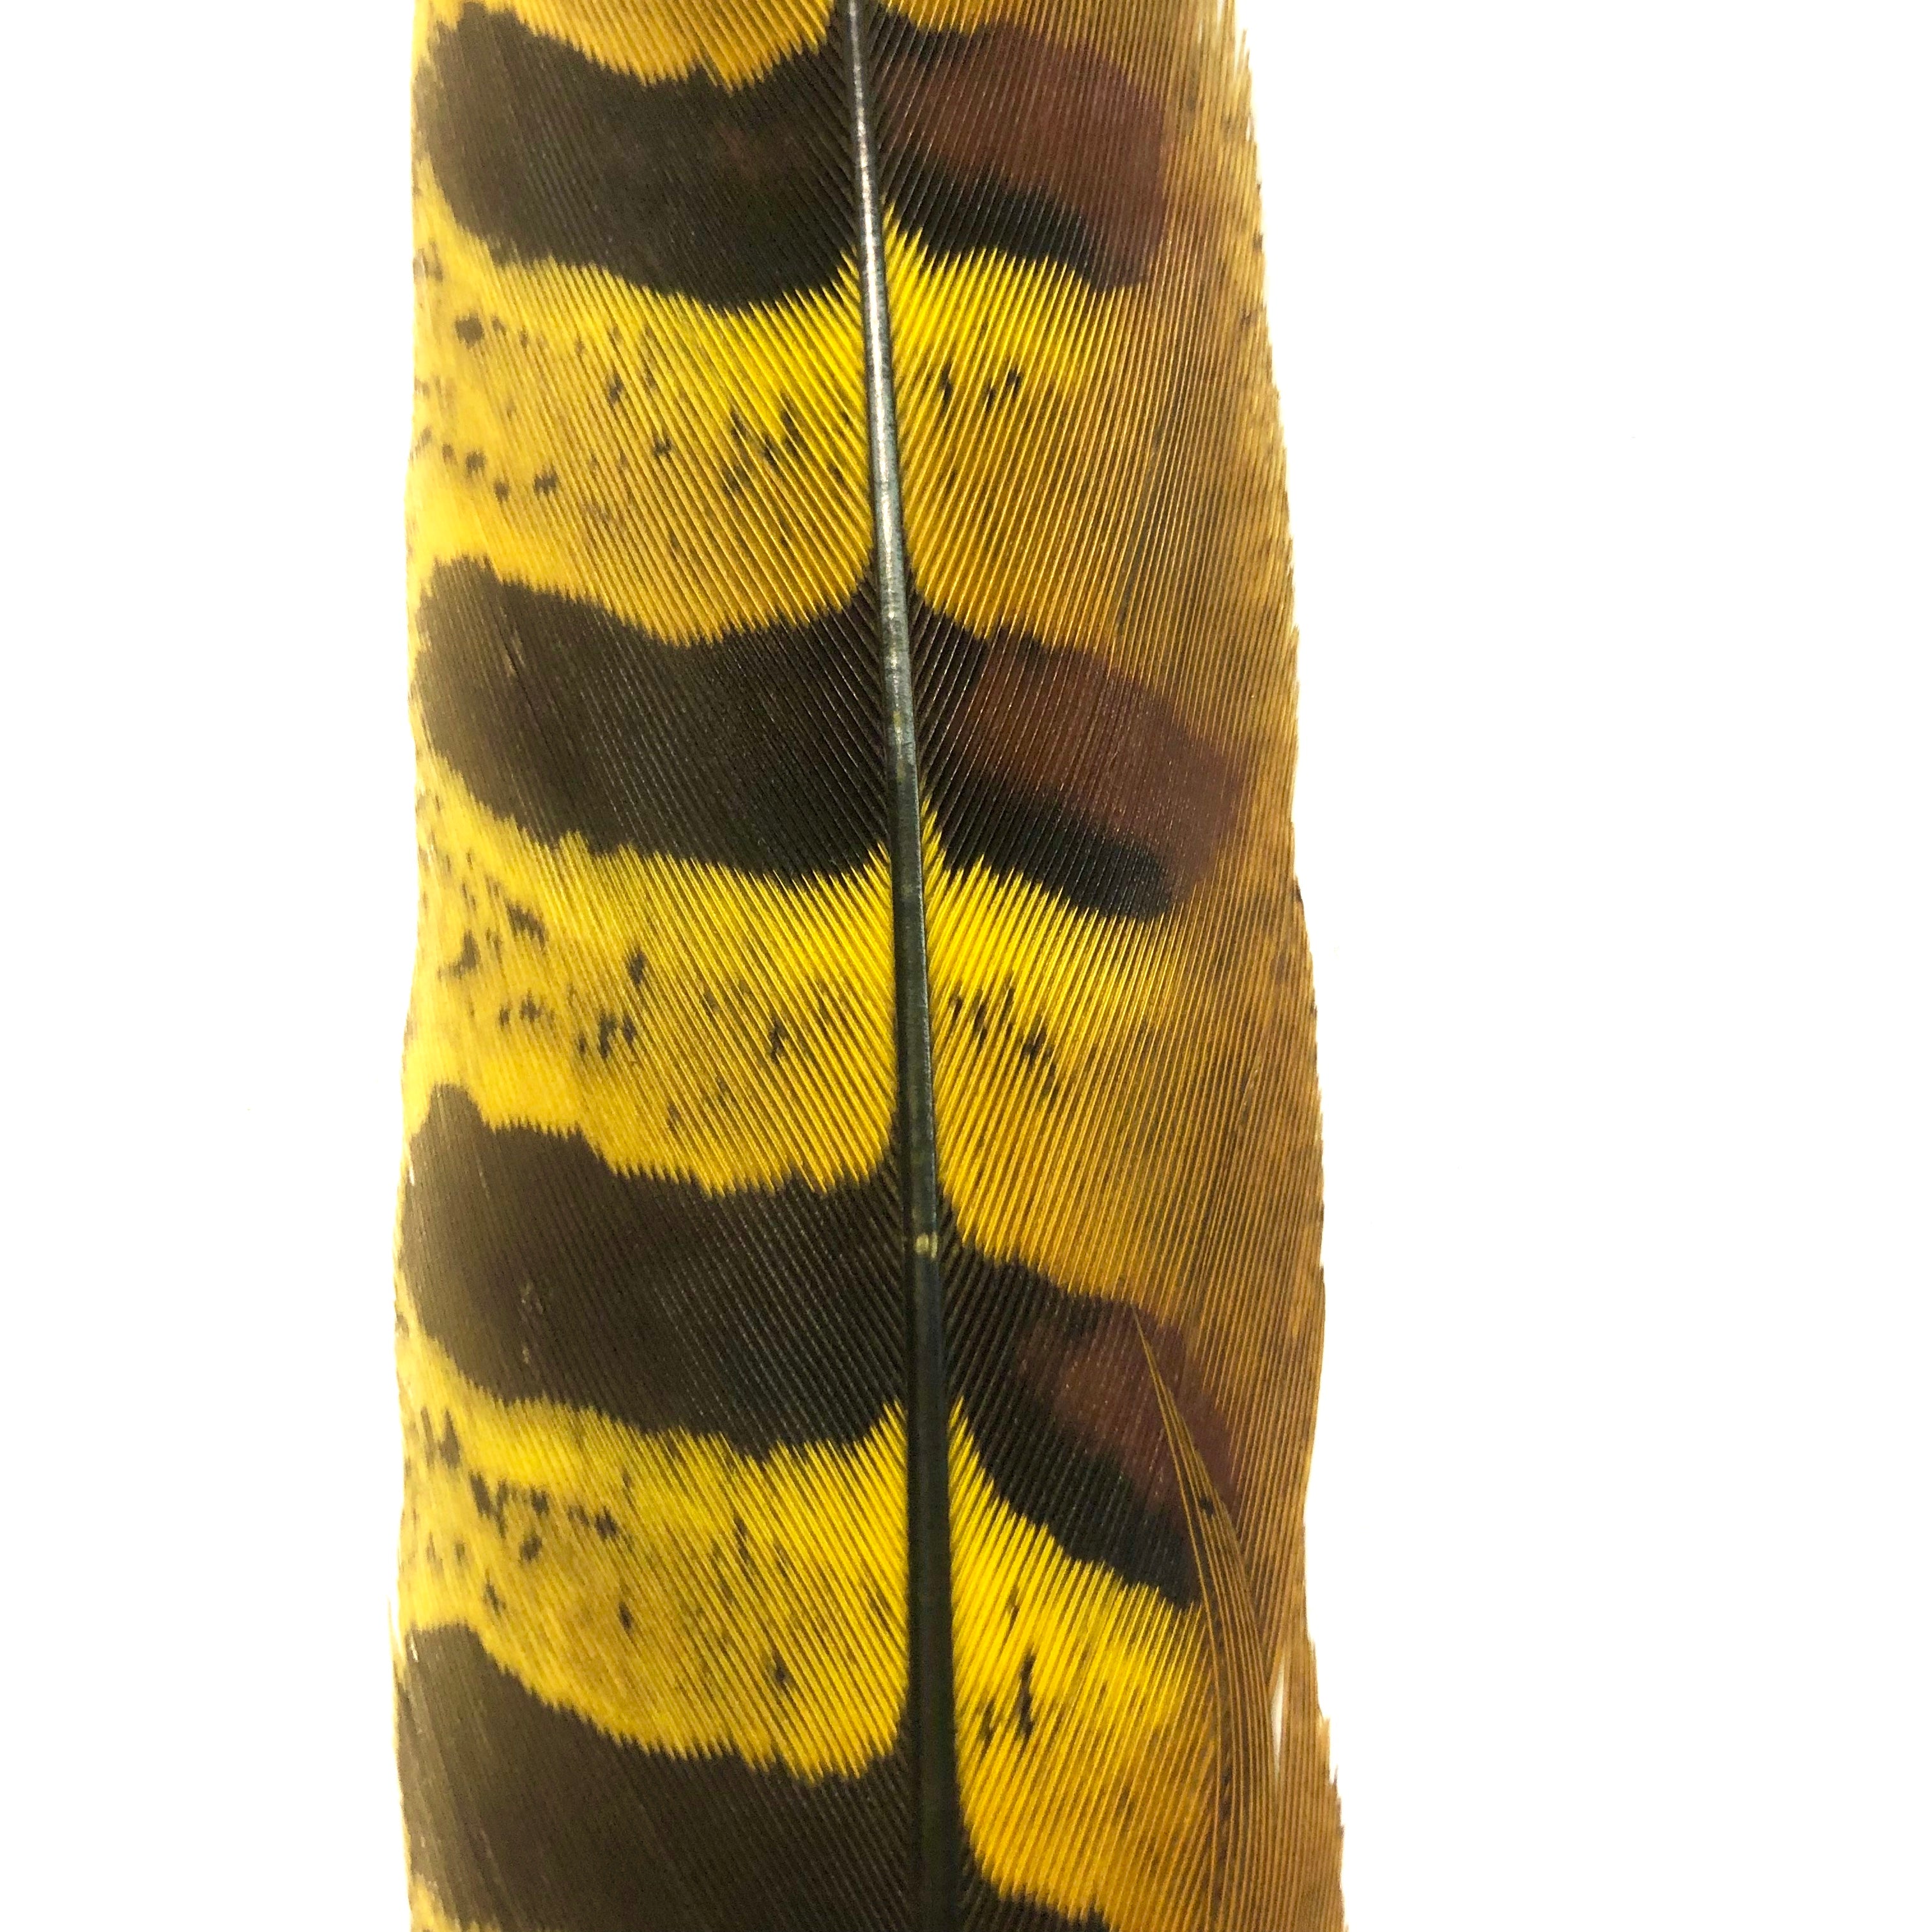 12" to 14" Reeves Pheasant Tail Feather - Yellow